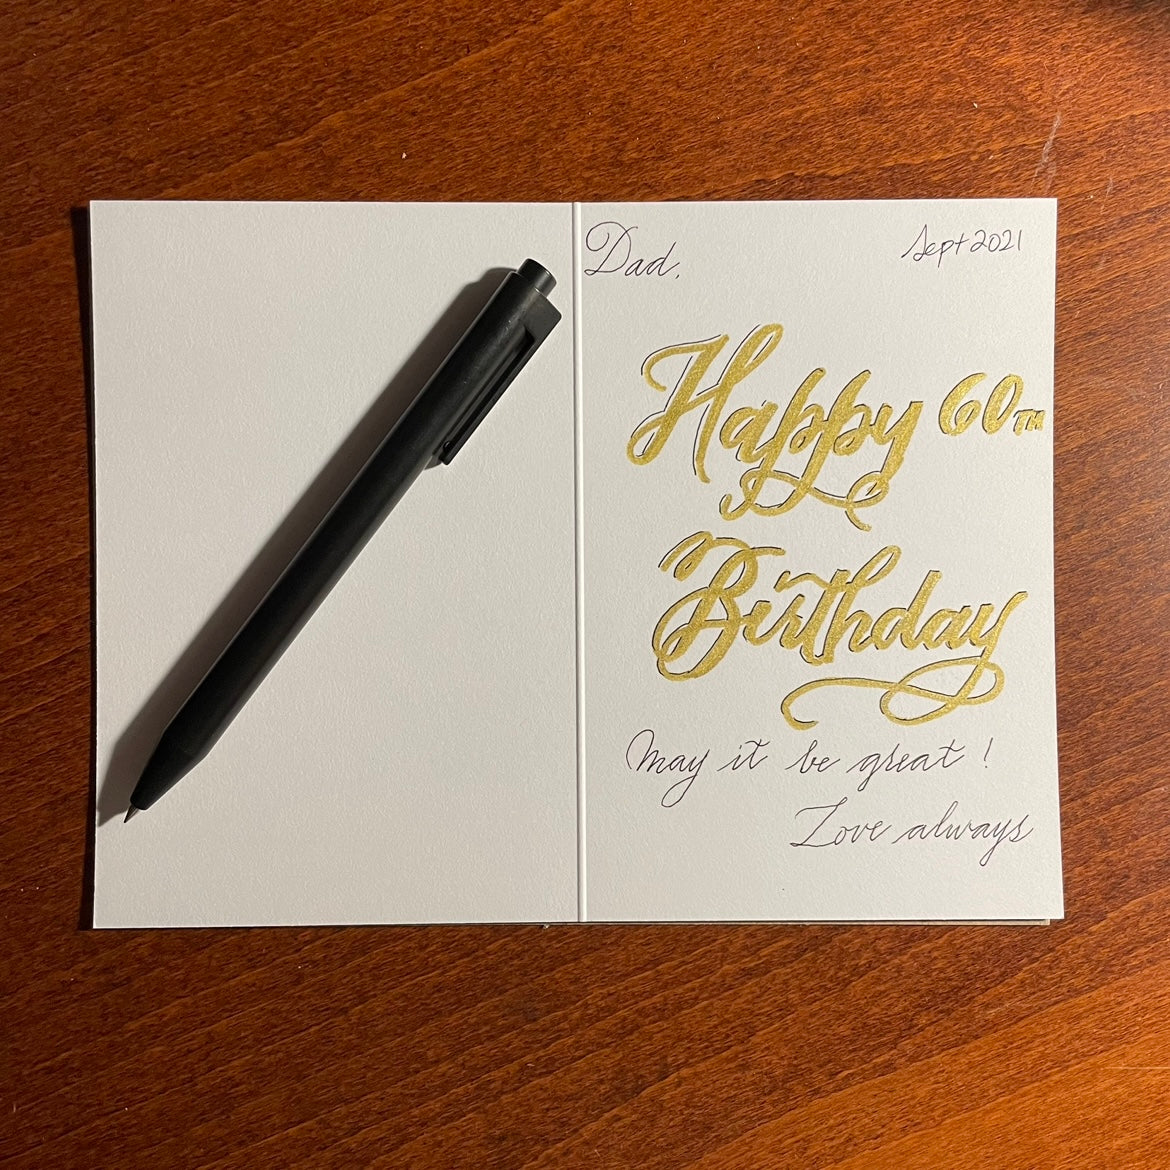 Happy 60th Birthday! May it be great! | Add a calligraphy written message to your greeting cards - Custom message services by Nibs and Scripts